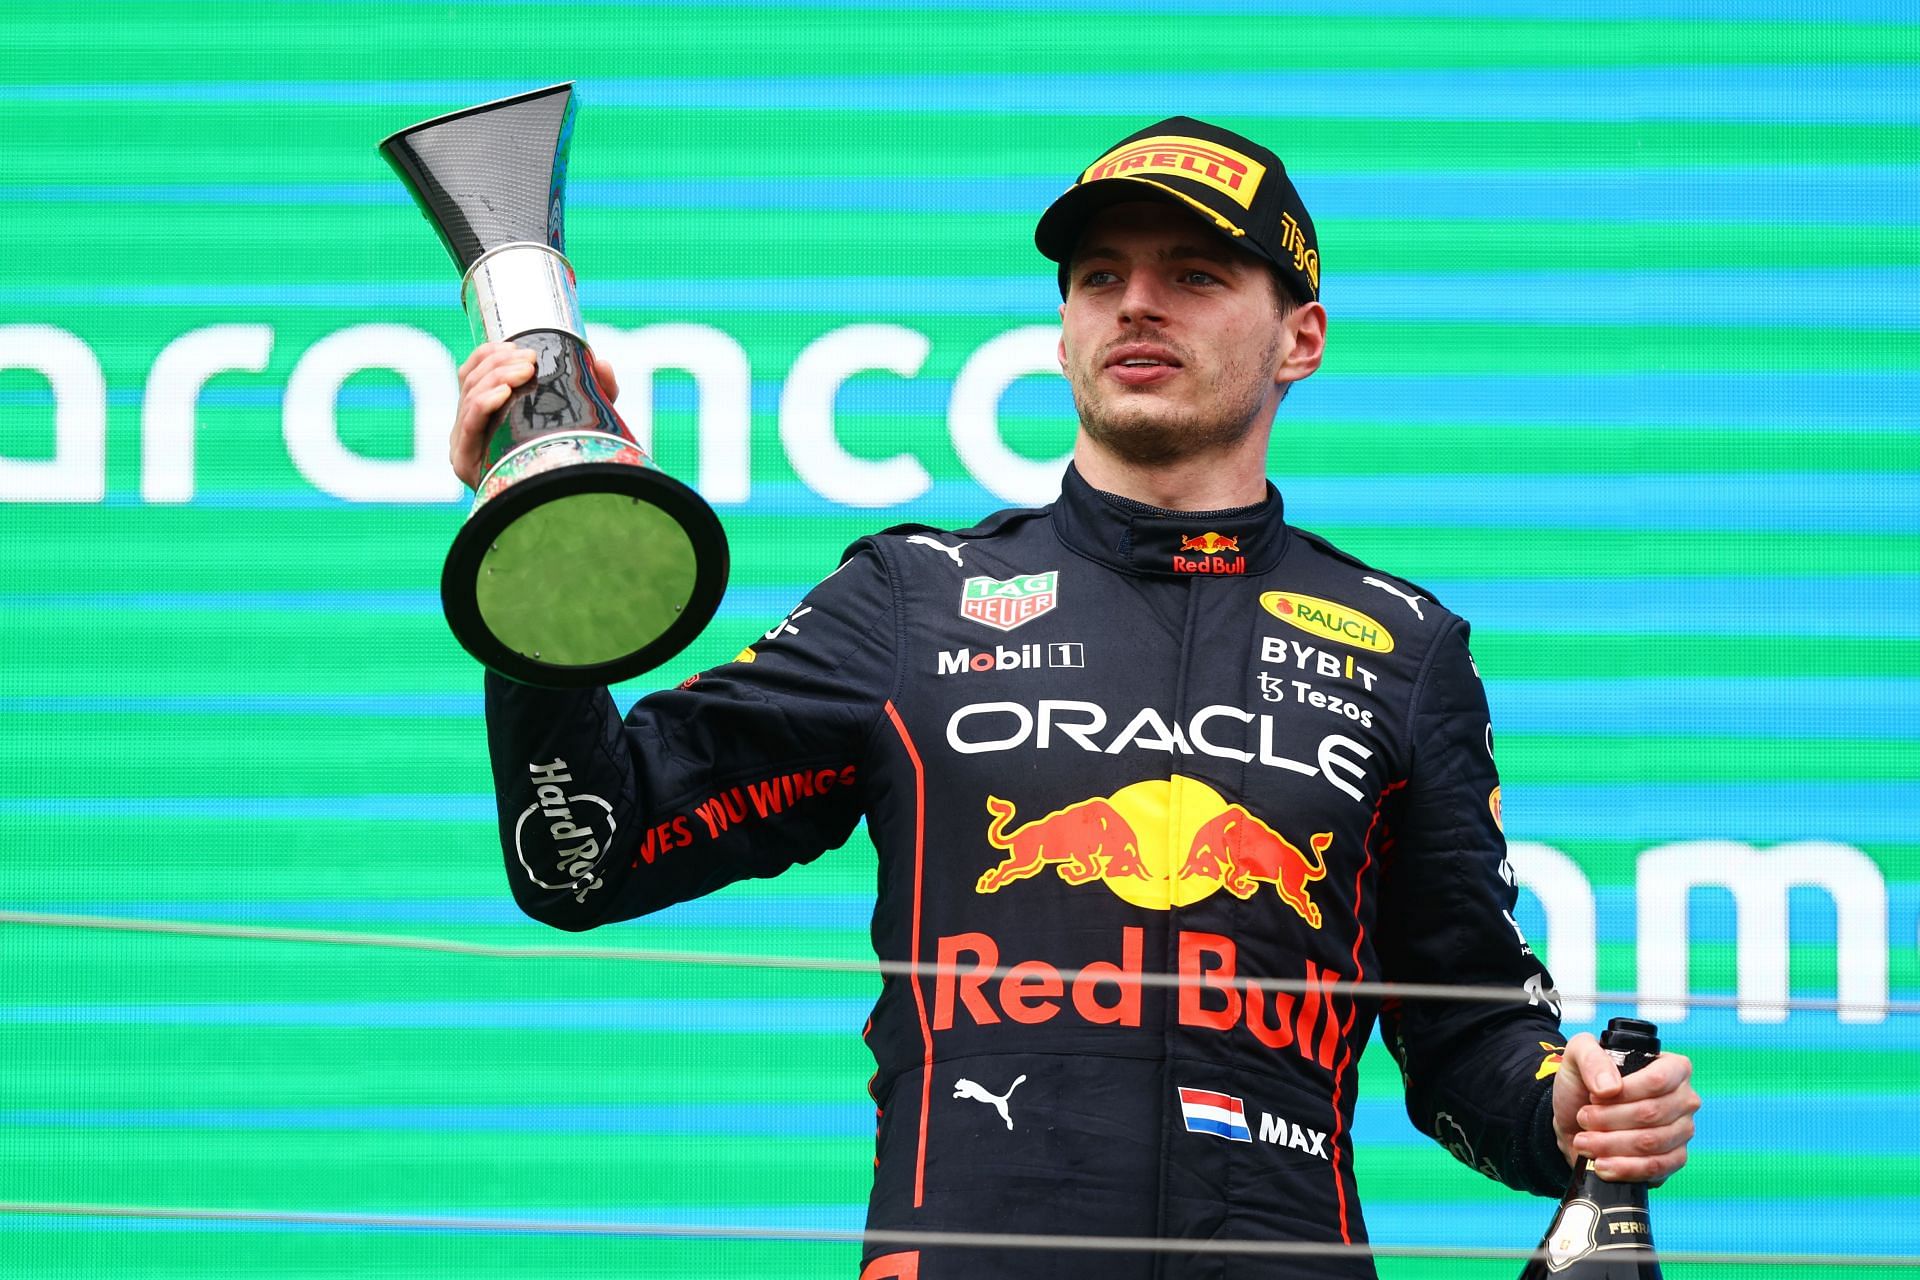 Max Verstappen celebrates on the podium after winning the F1 Hungarian Grand Prix at Hungaroring in Budapest, Hungary (Photo by Francois Nel/Getty Images)